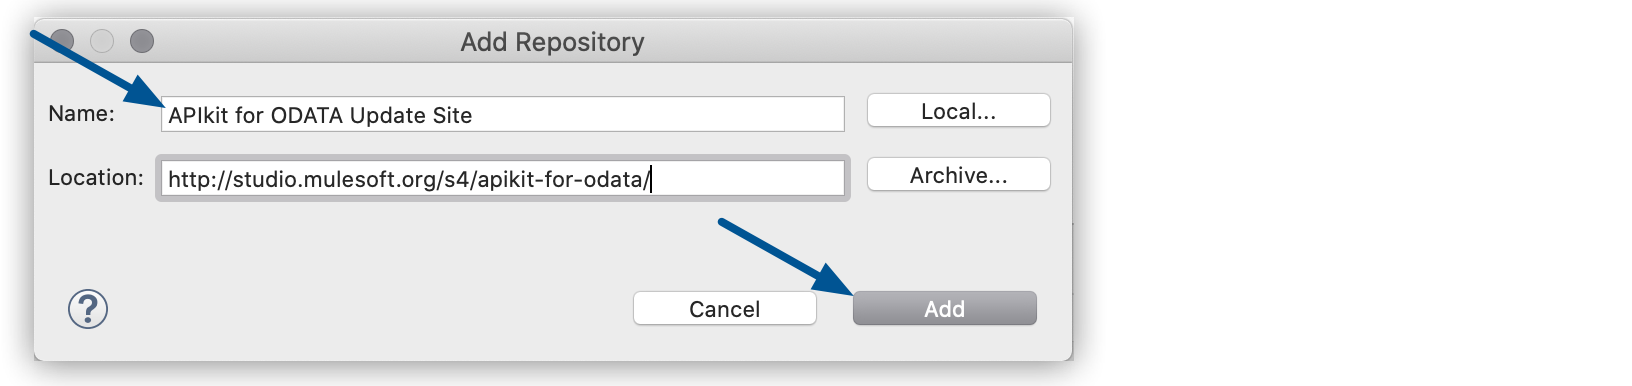 Window for adding a repository with the Add button and the name and location fields highlighted.